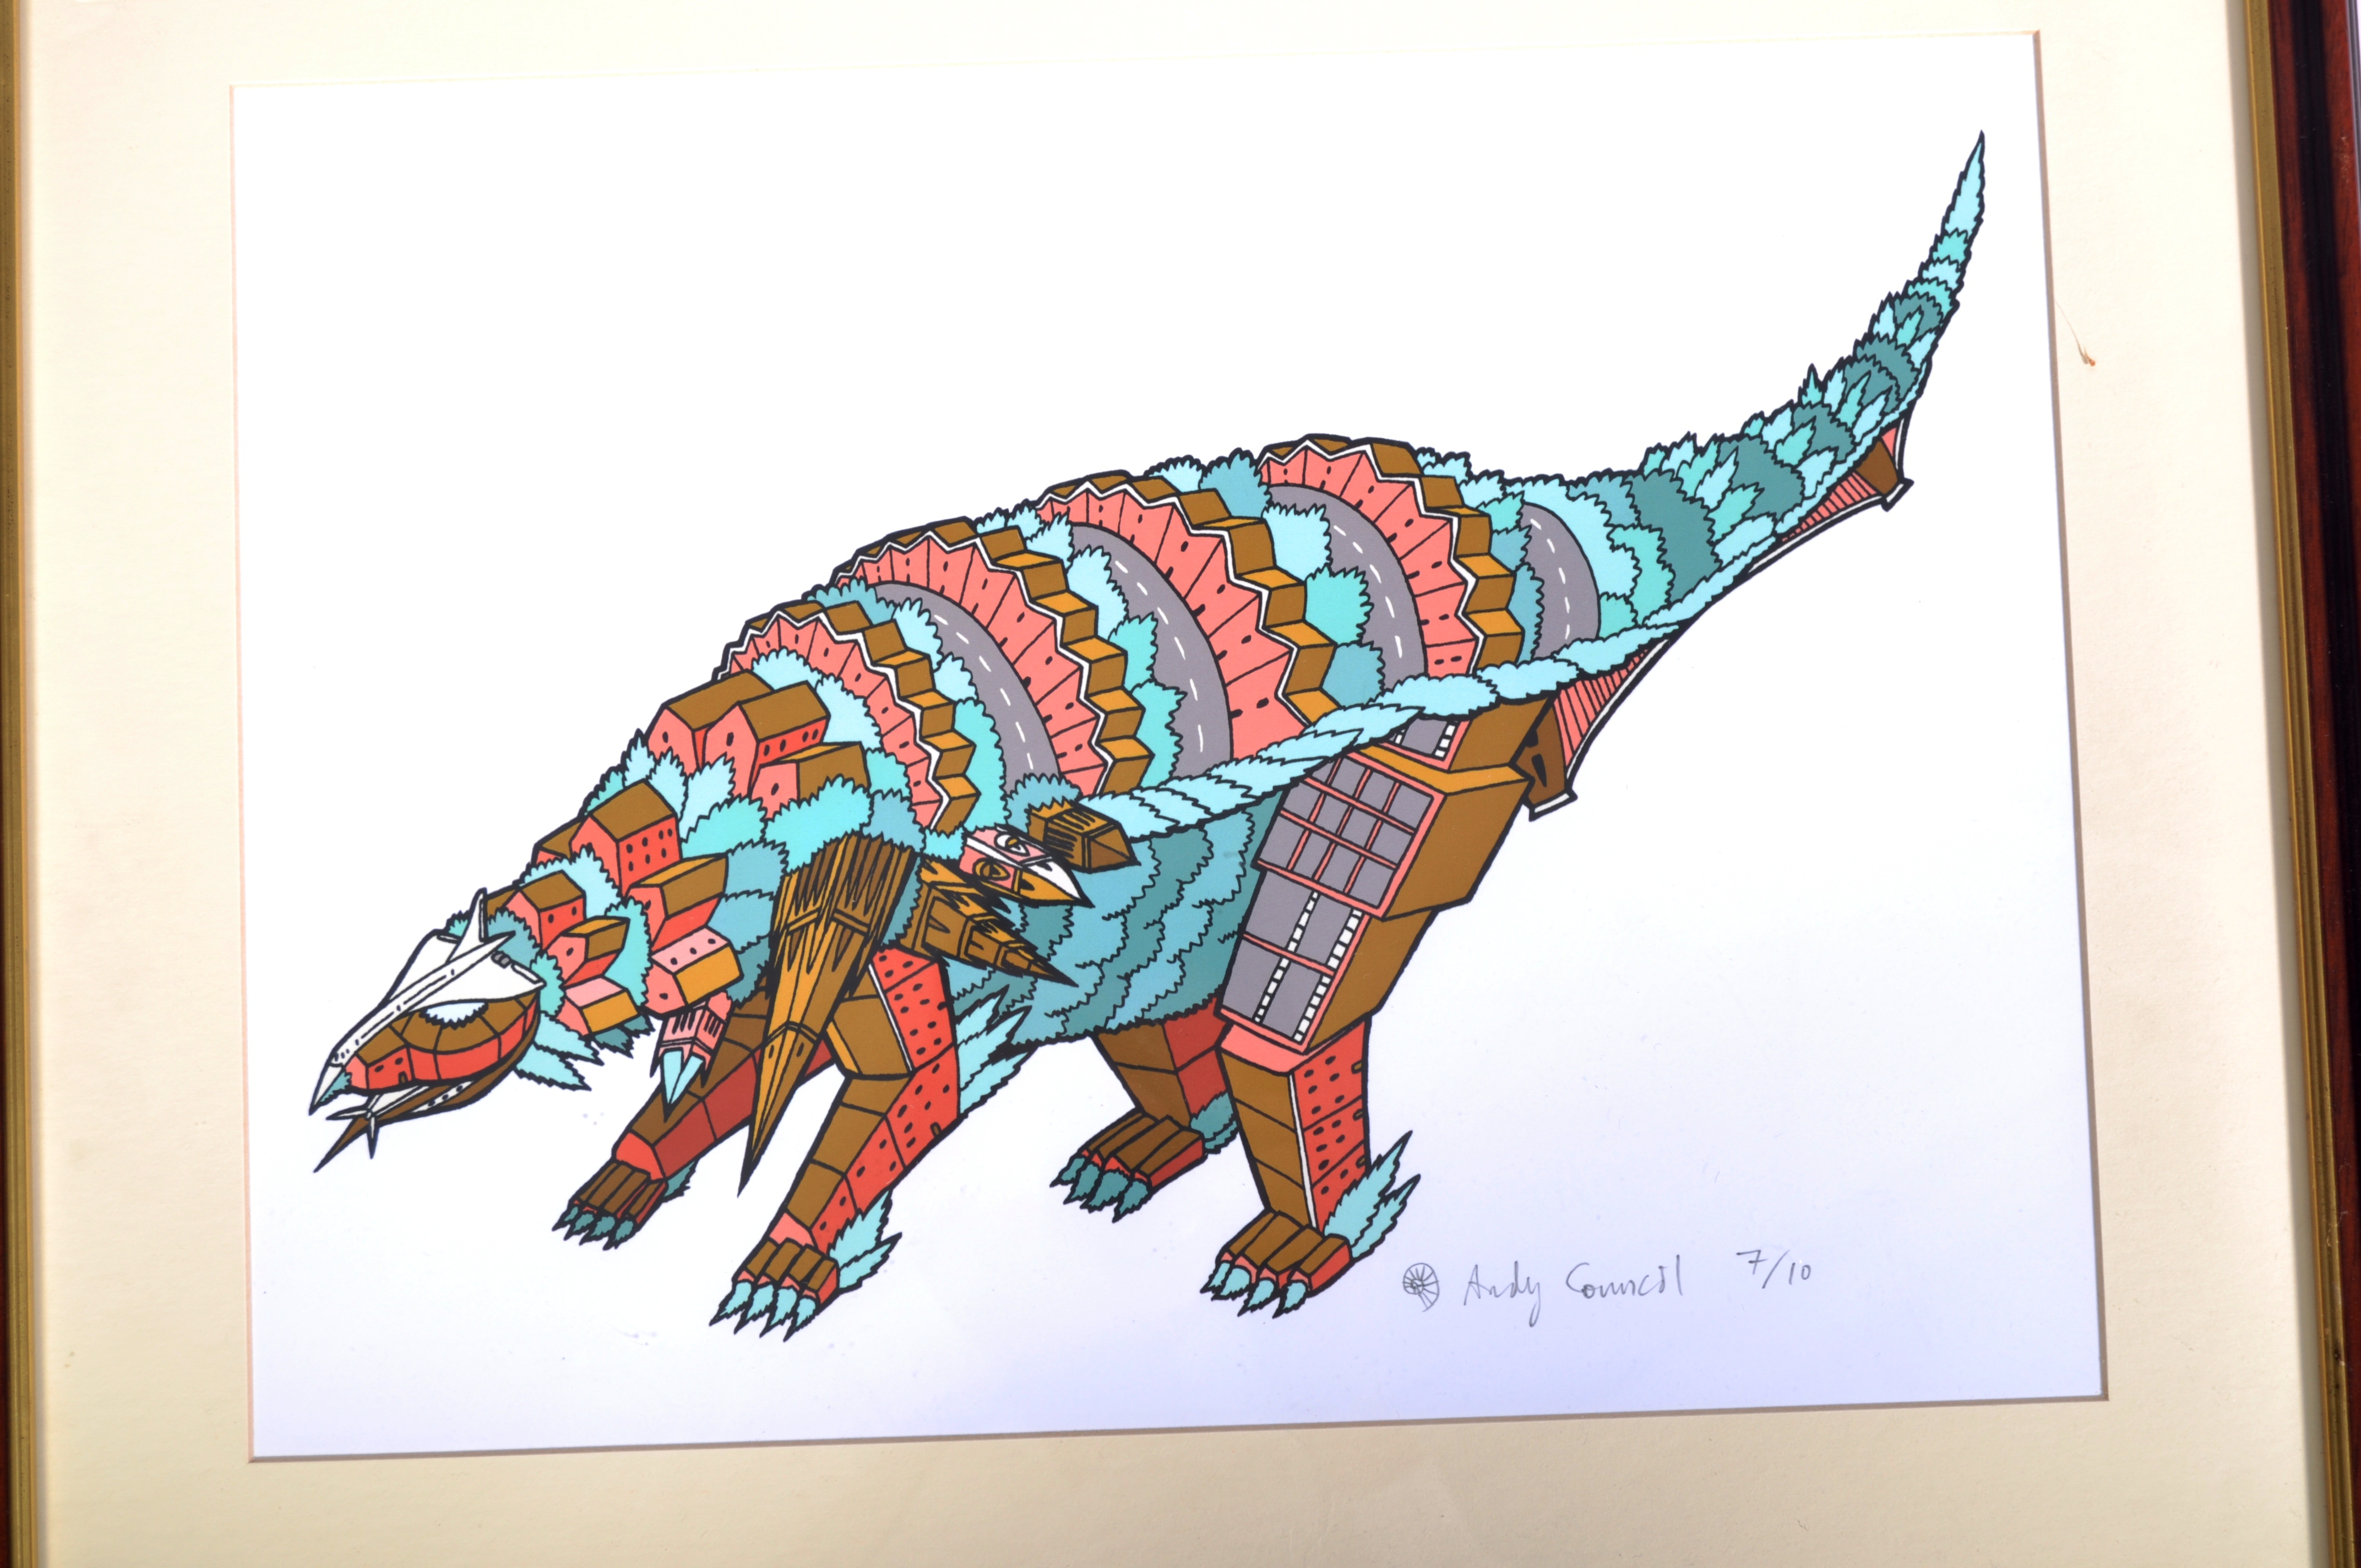 BRISTOL EDMONTONIA 2013 SIGNED LIMITED PRINT BY ANDY COUNCIL - Image 2 of 6